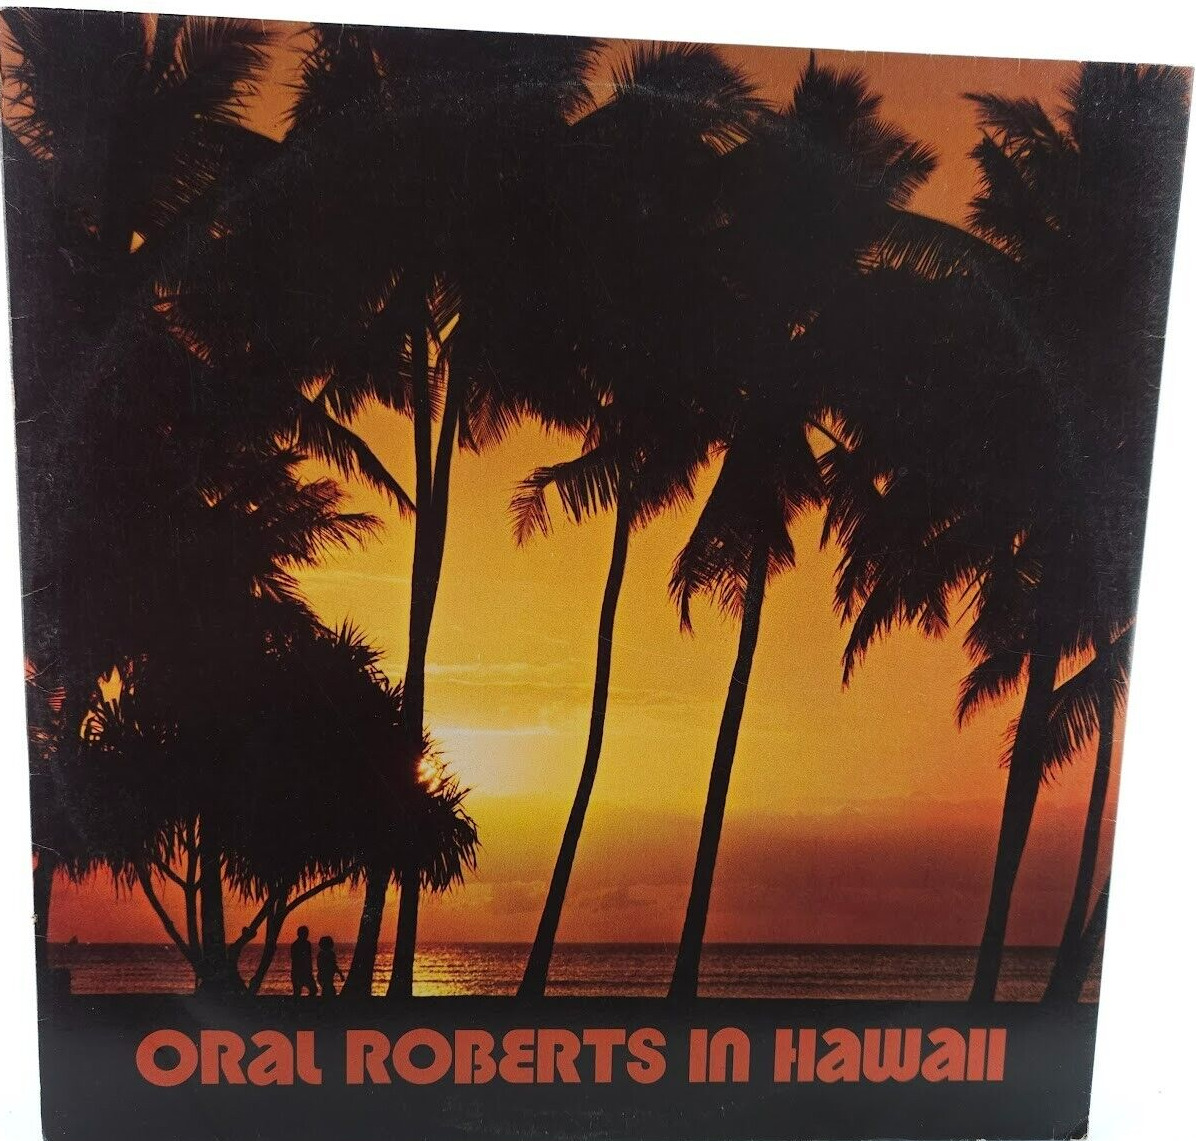 Oral Roberts In Hawaii Album Vinyl 1972 Light Lexicon Music Stereo LS-5575-LP